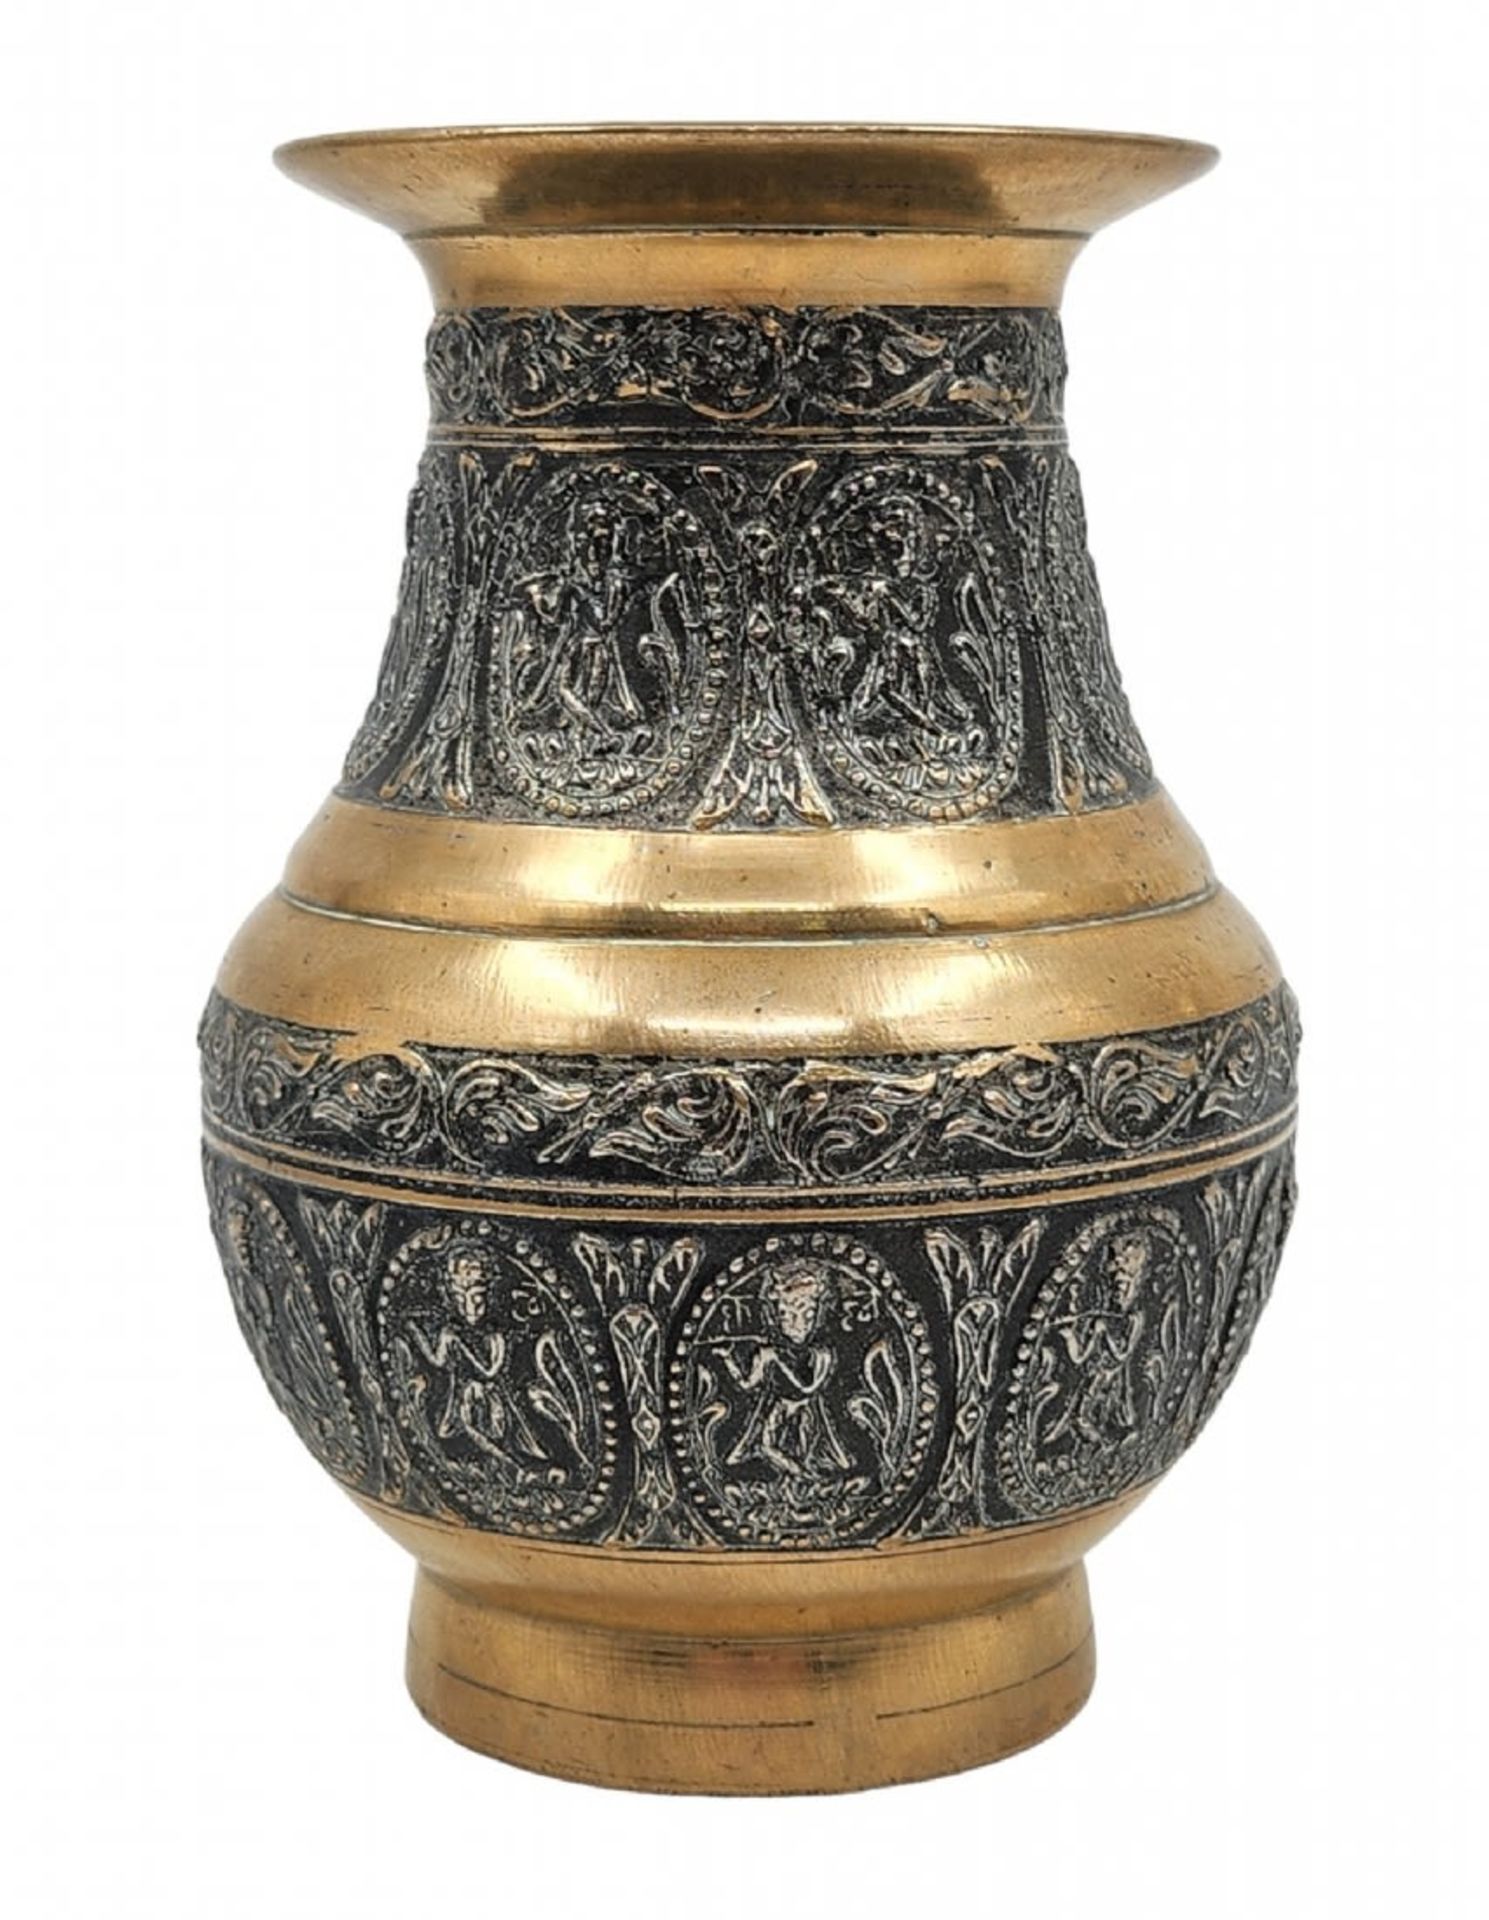 Indian pitcher made of brass, a partly silvered cast decorative urn. Width: 11 cm. Height: 15.5